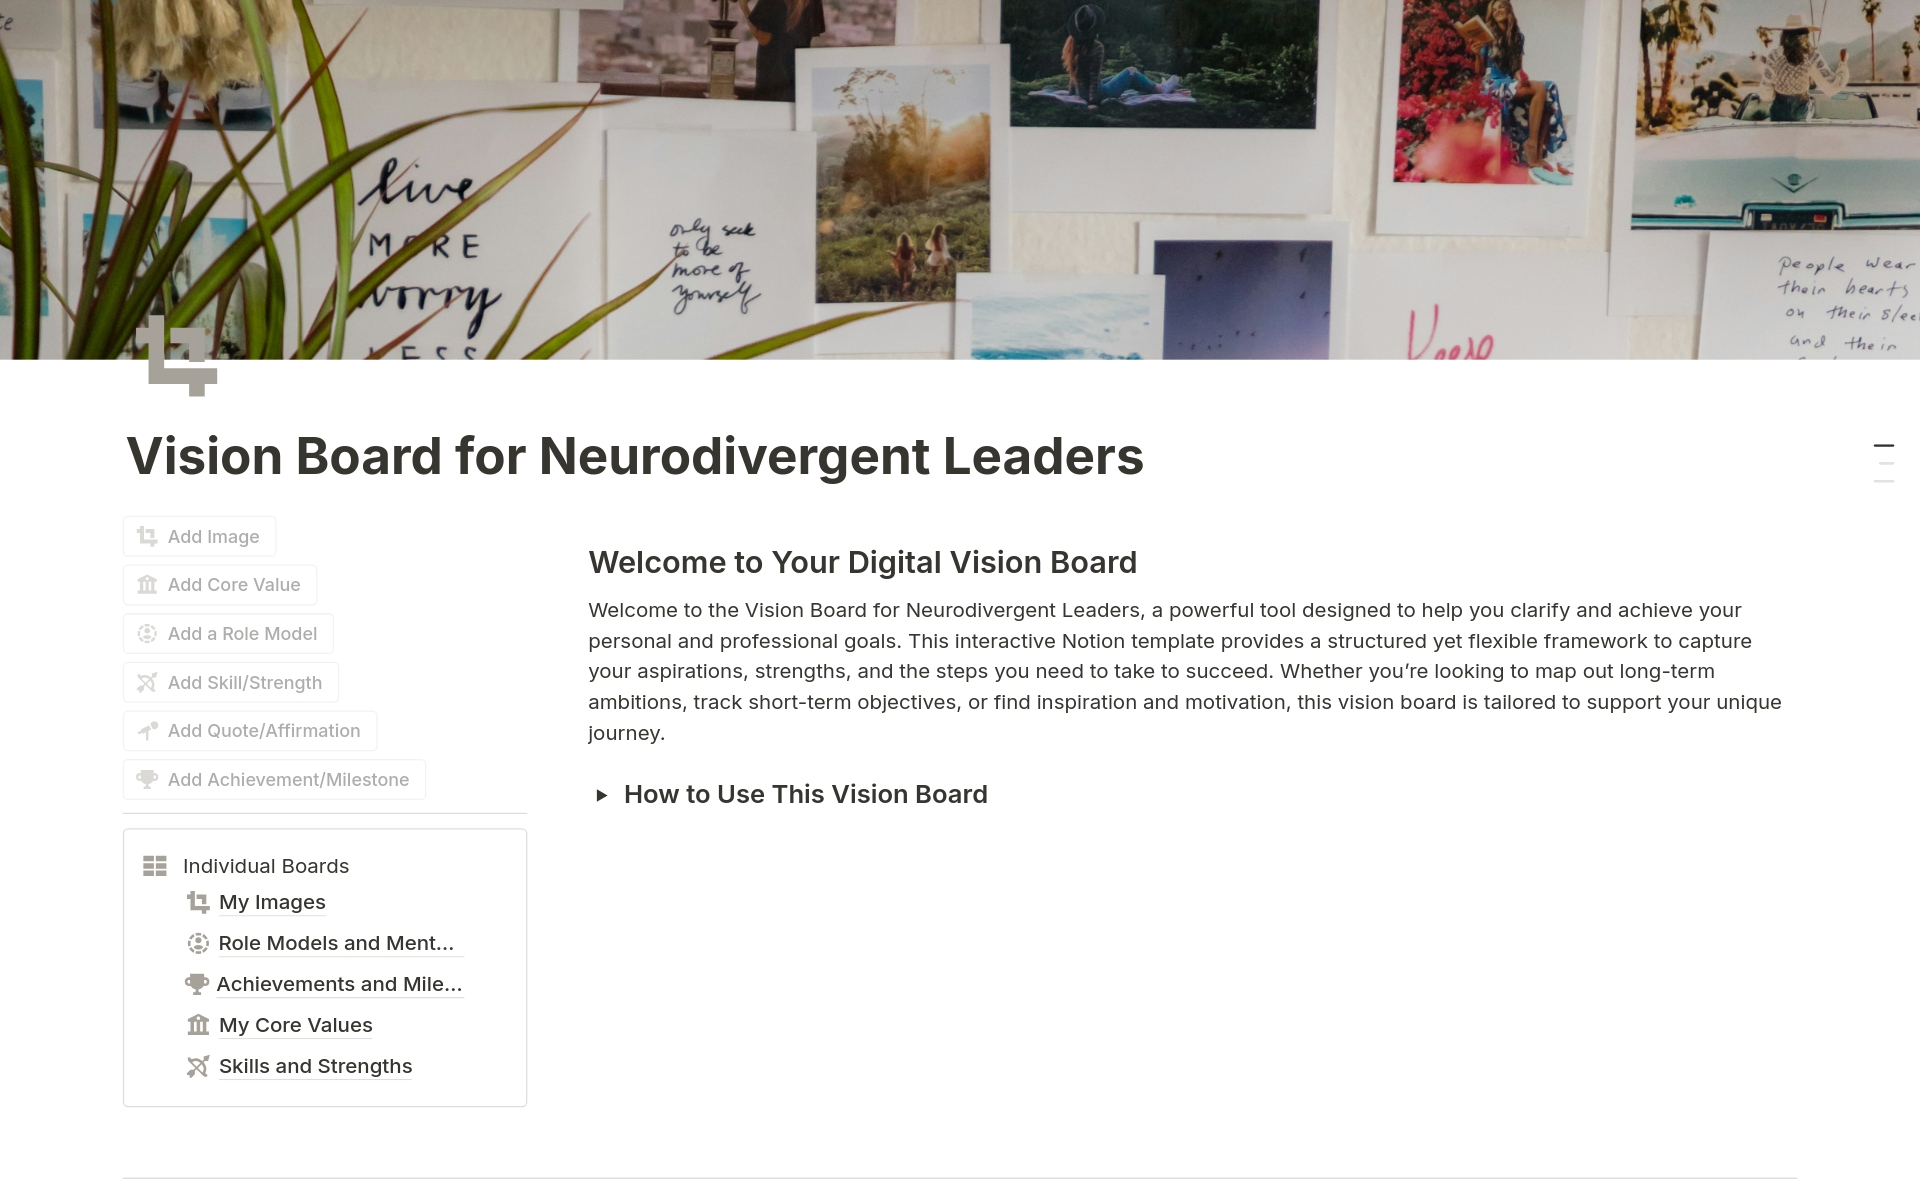 Create a dynamic Vision Board for Leaders to visualize goals, track achievements, identify core values, showcase skills, and leverage your support network. Use curated or personal images to inspire and stay focused on growth. Customize and update regularly for continuous developm